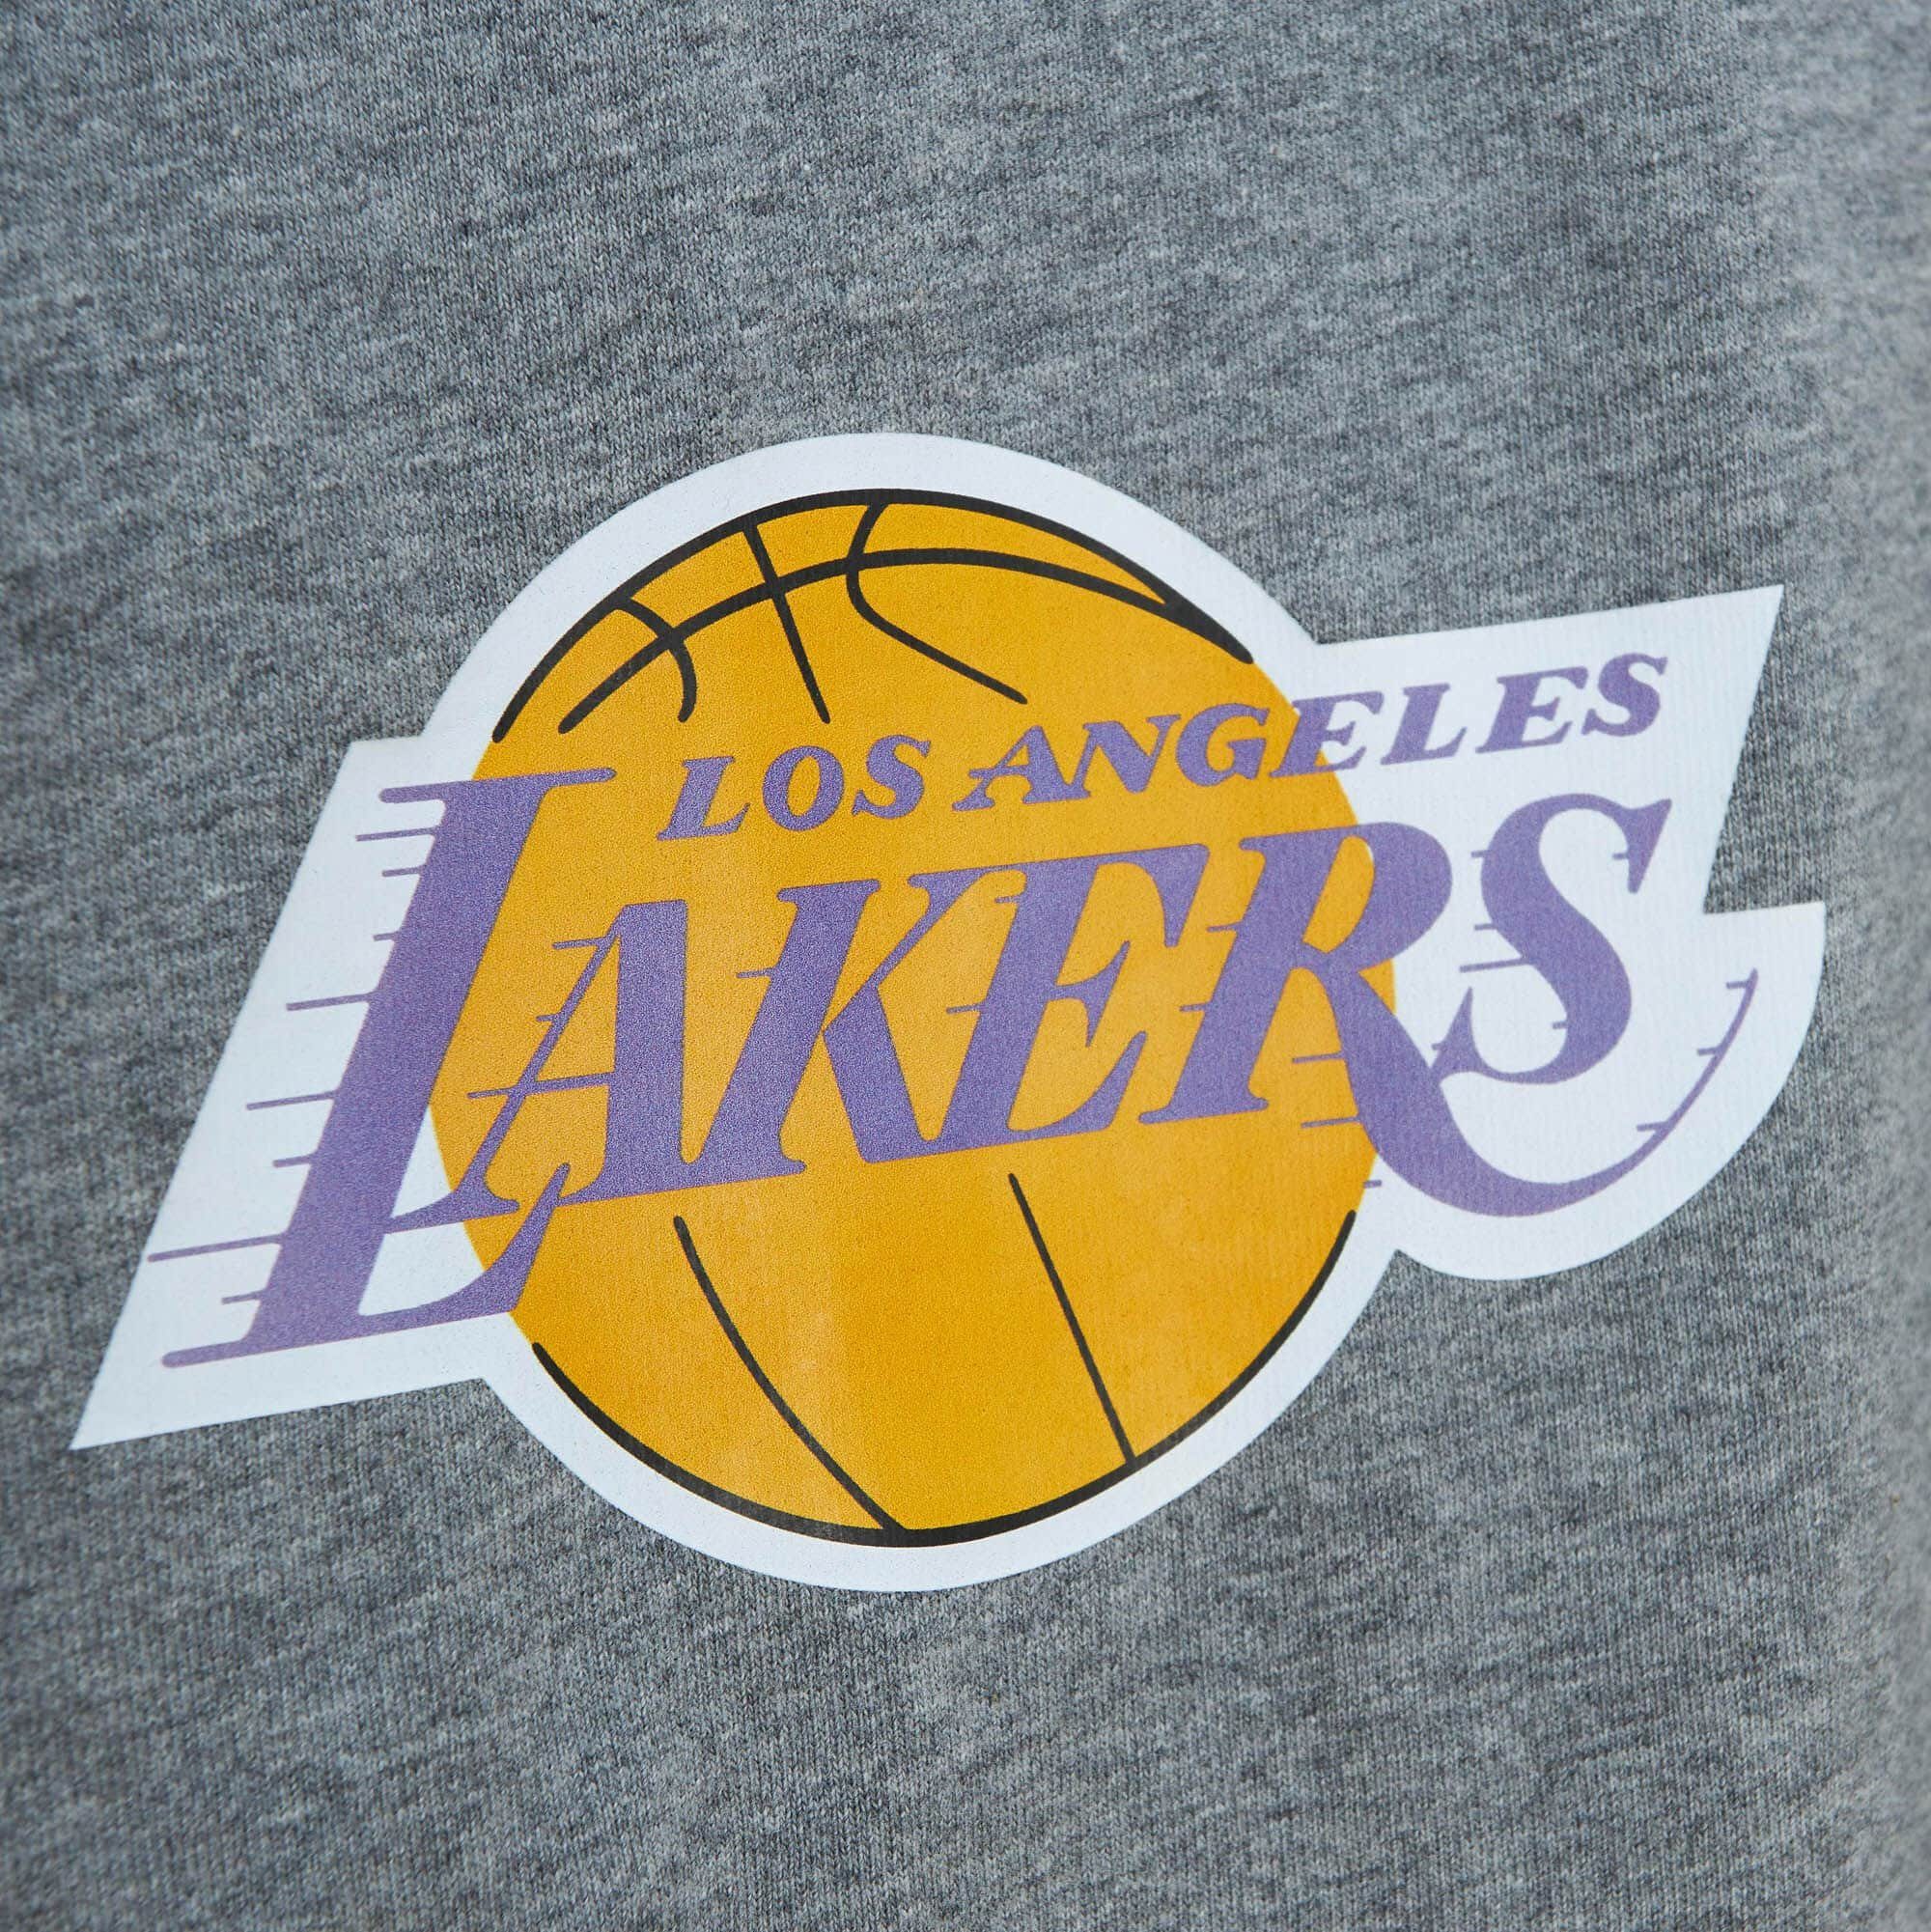 CITY HOMETOWN & Mitchell Los Print-Shirt Ness Lakers Angeles